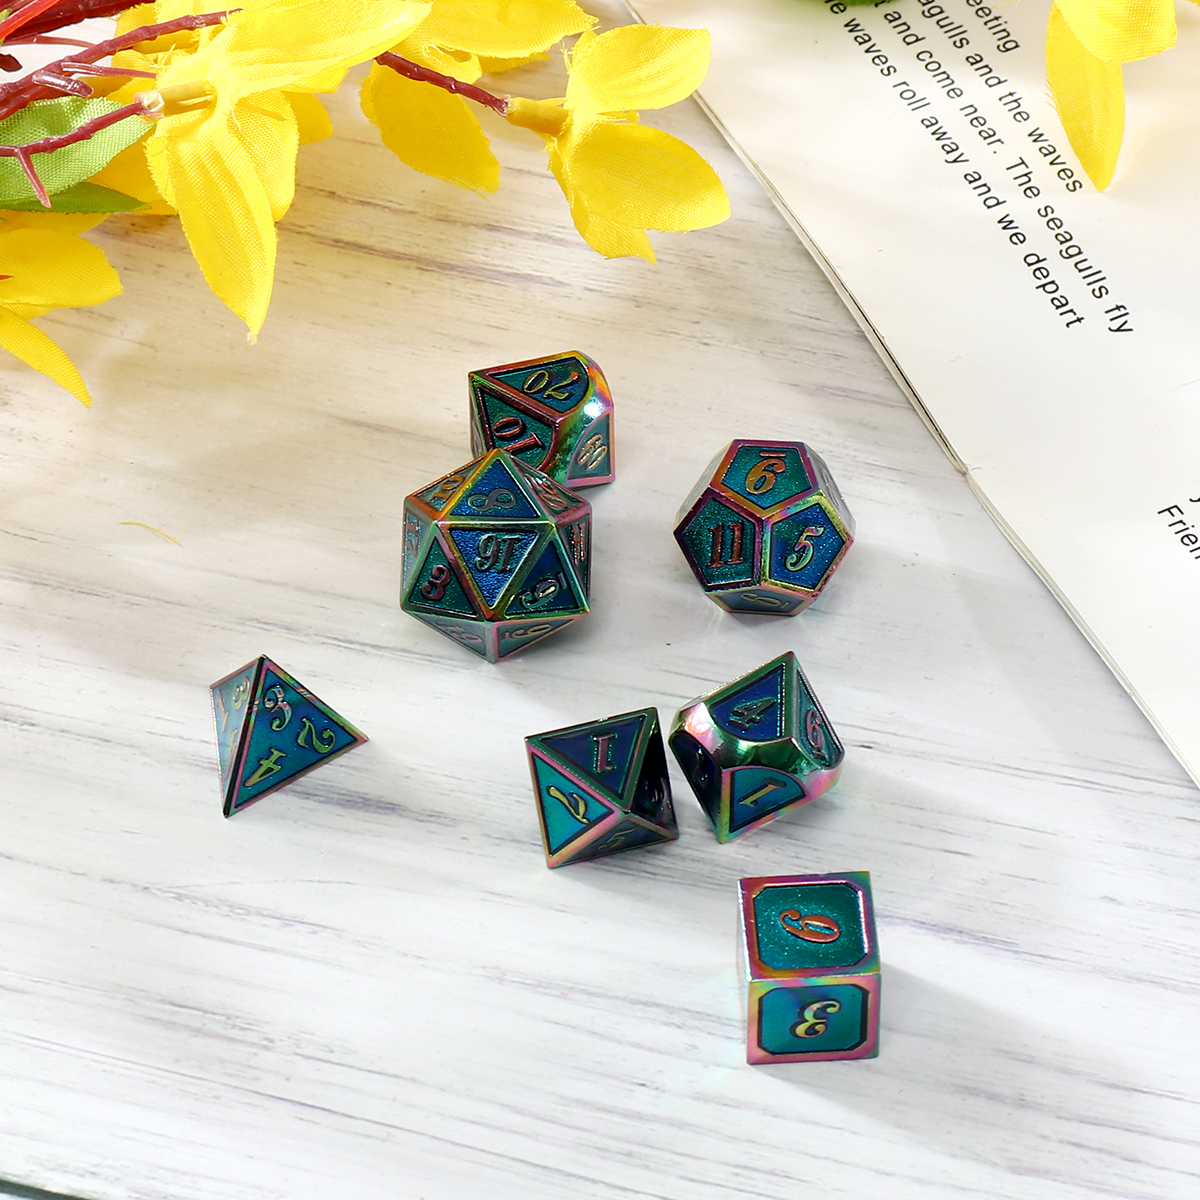 7PCS-Metal-Polyhedral-Dices-Set-For-Dungeons-and-Dragons-Dice-Desktop-Table-RPG-Game-1633181-1